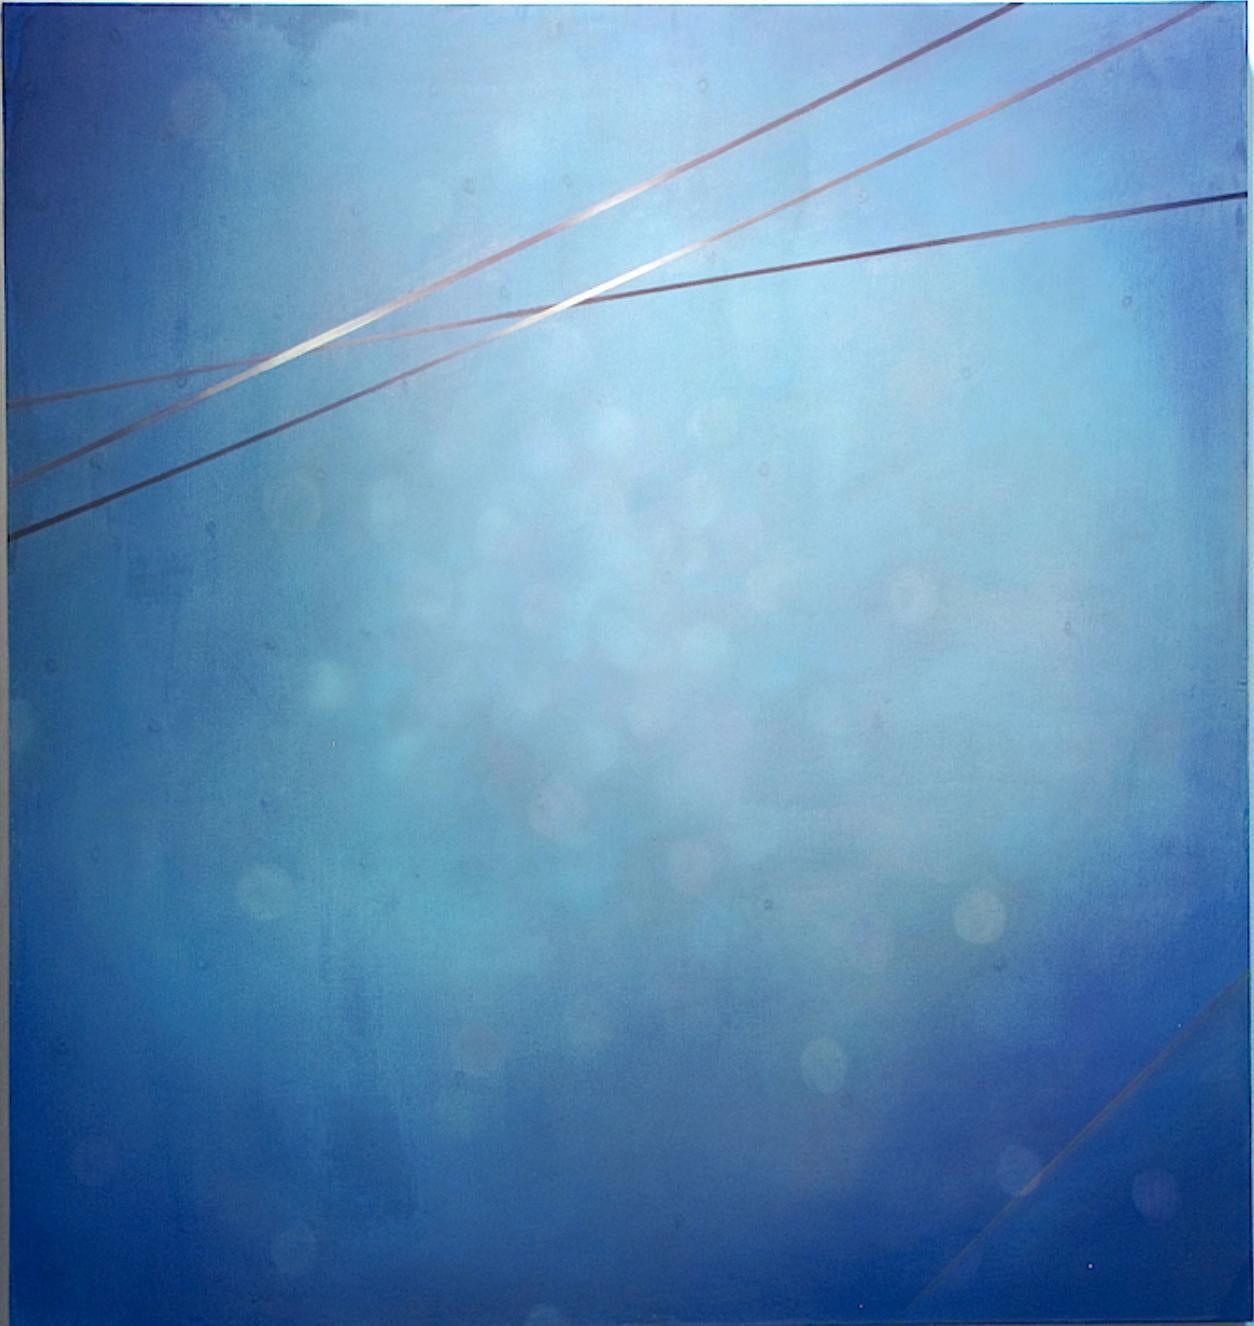 Heather Hartman Landscape Painting - Composition in Blue #2 - acrylic, oil on polyester mesh - royal blue light 